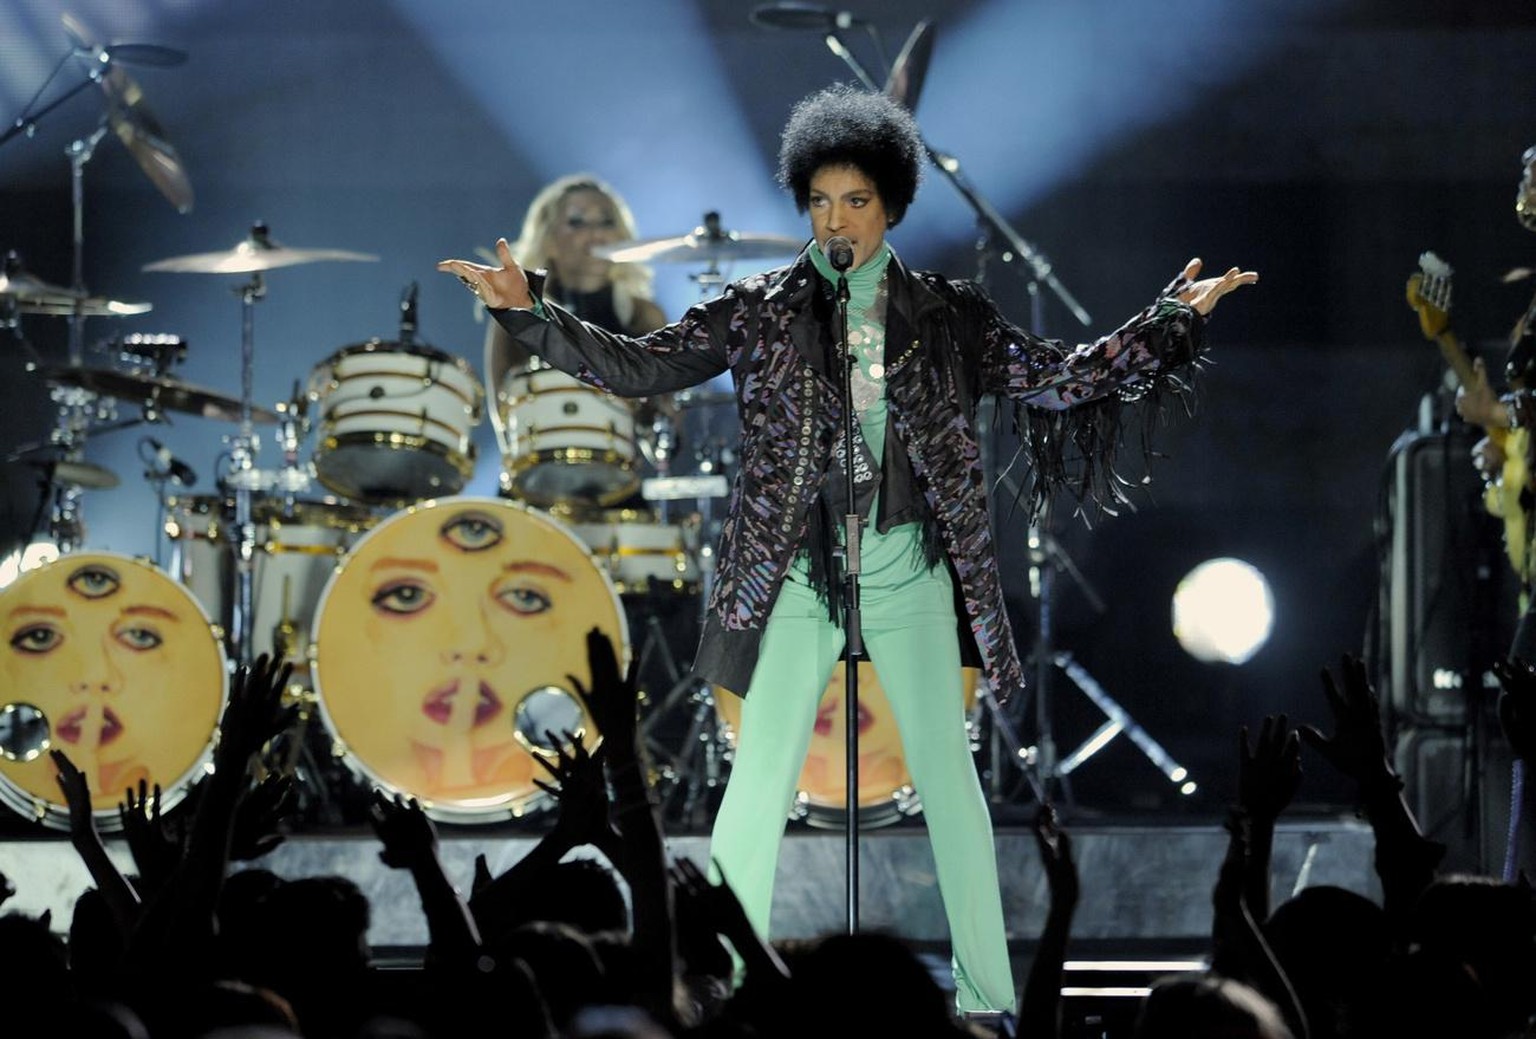 Prince performs at the Billboard Music Awards at the MGM Grand Garden Arena on Sunday, May 19, 2013 in Las Vegas. (Photo by Chris Pizzello/Invision/AP)